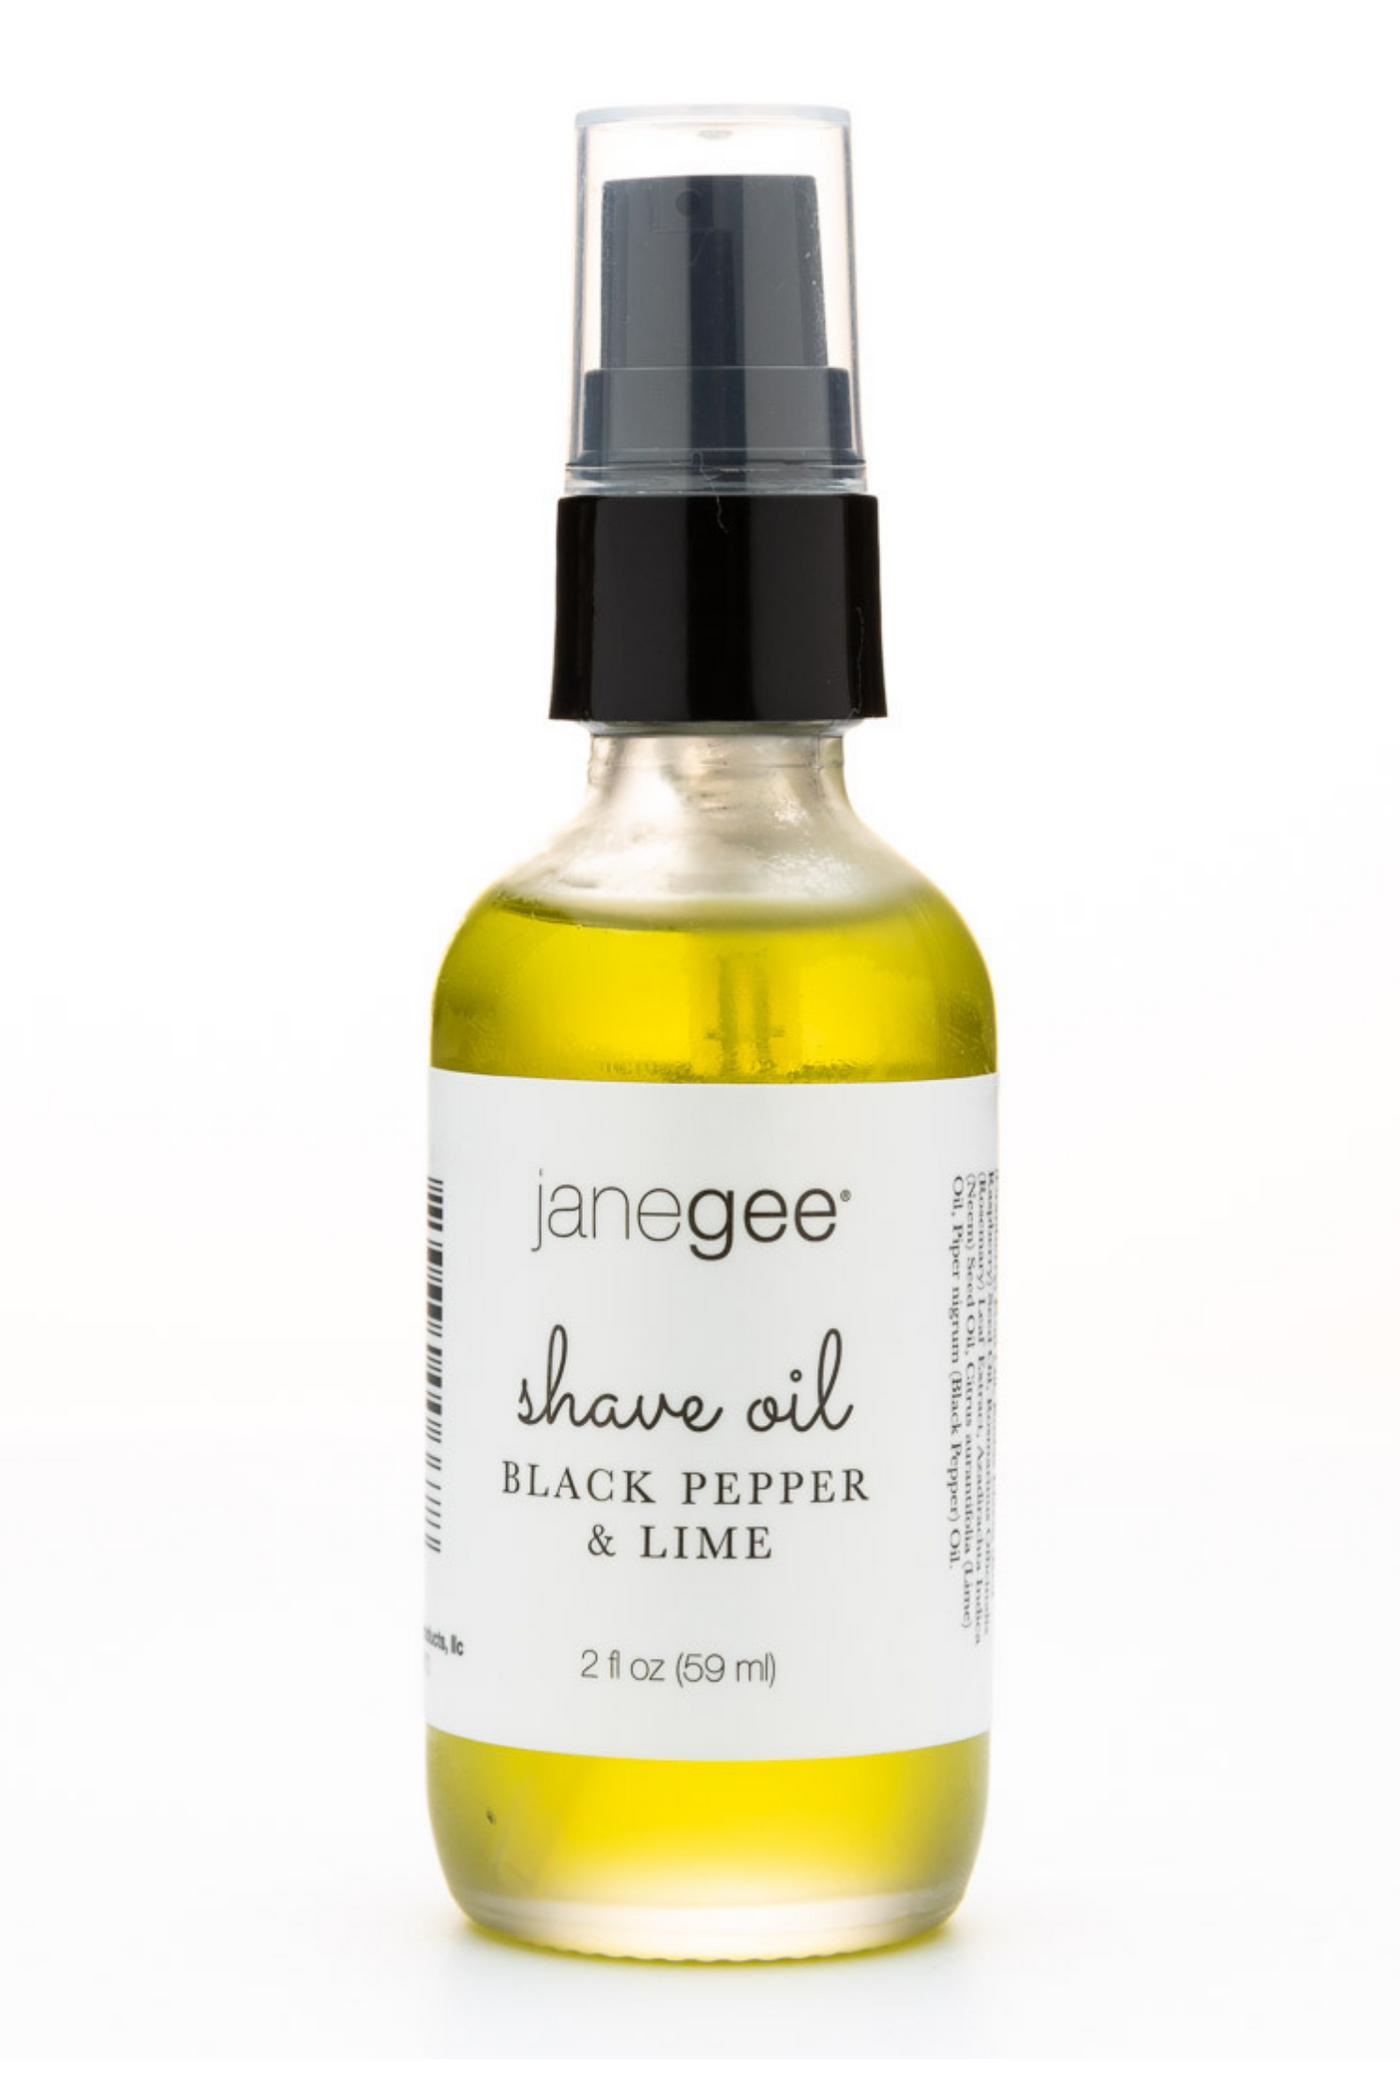 janegee Shave Oil